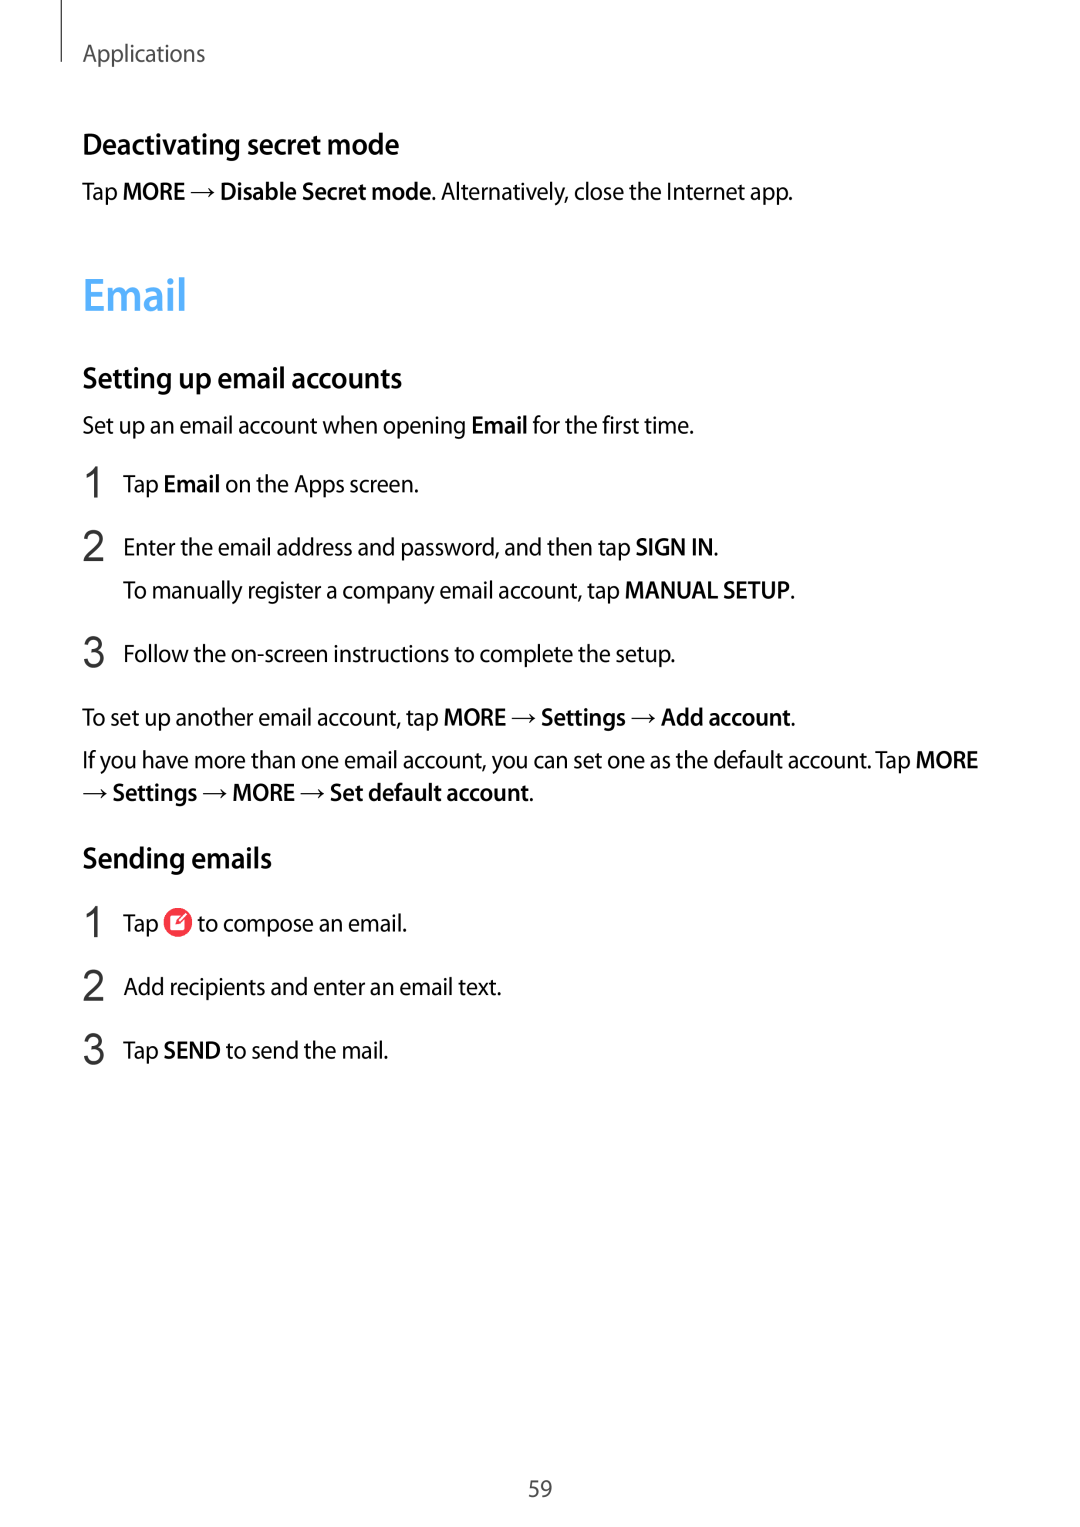 Samsung SM-T819NZDEITV manual Email, Deactivating secret mode, Setting up email accounts, Sending emails, Applications 